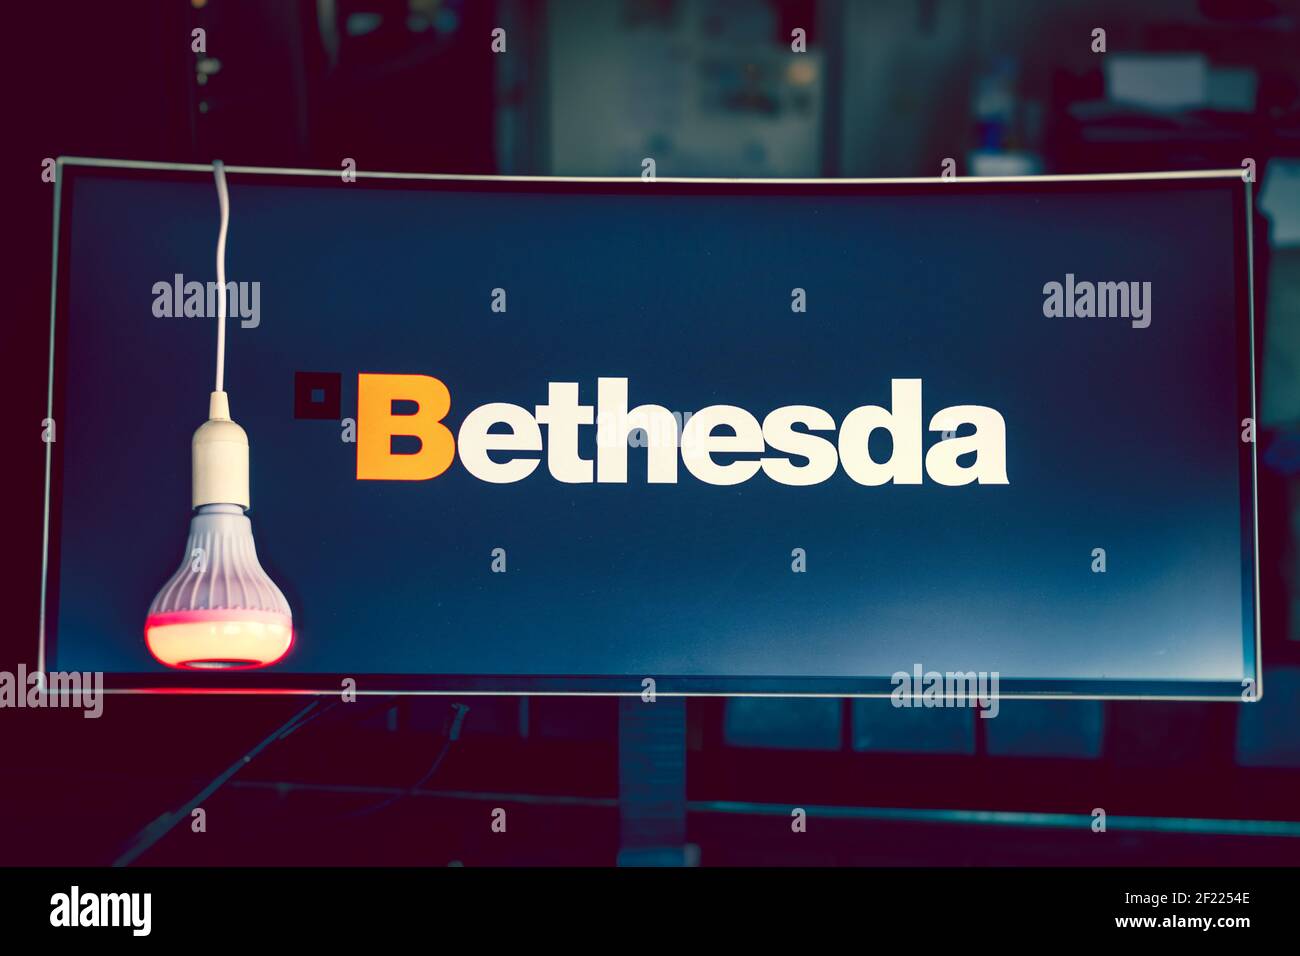 monitor logo Bethesda software house producer of video games, famous for Elder Scrolls and Fallout brands Stock Photo